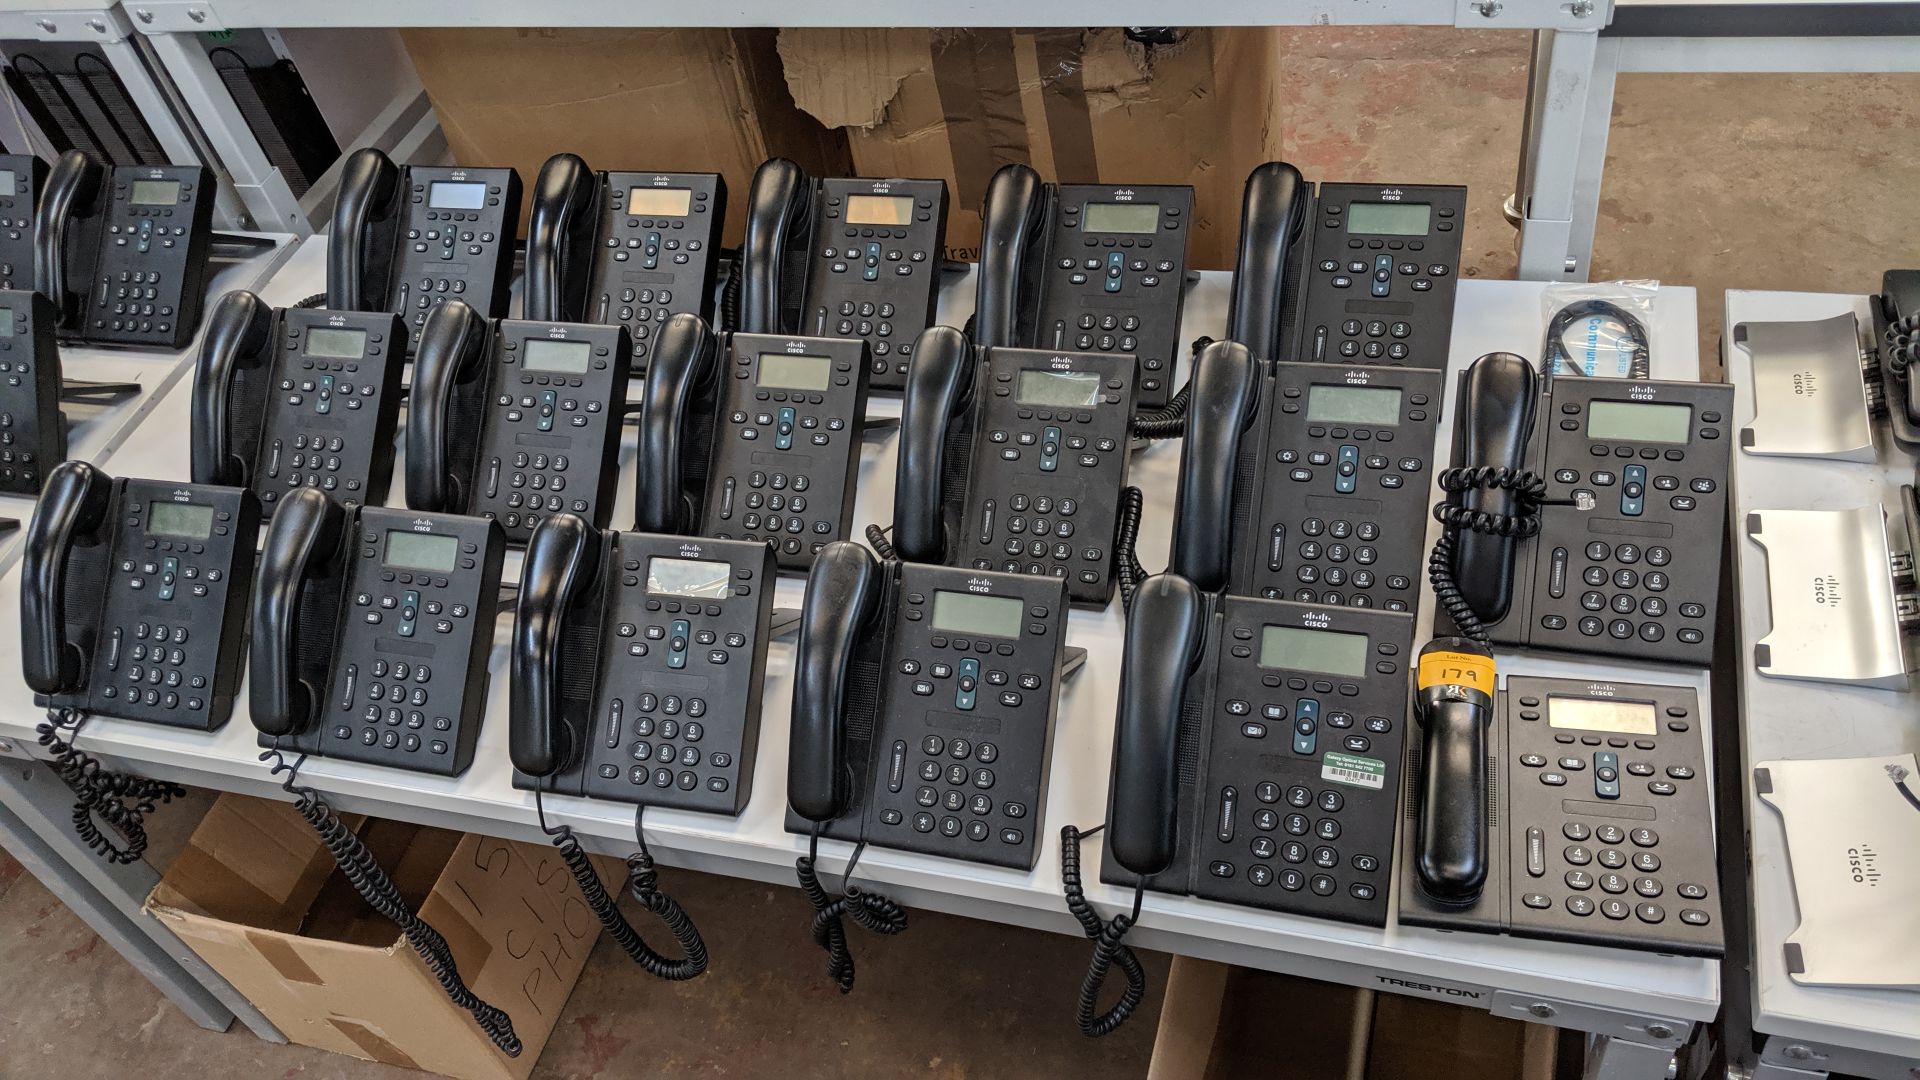 17 off Cisco model CP-6941 telephone handsets (16 of the handsets include a desk stand & one does